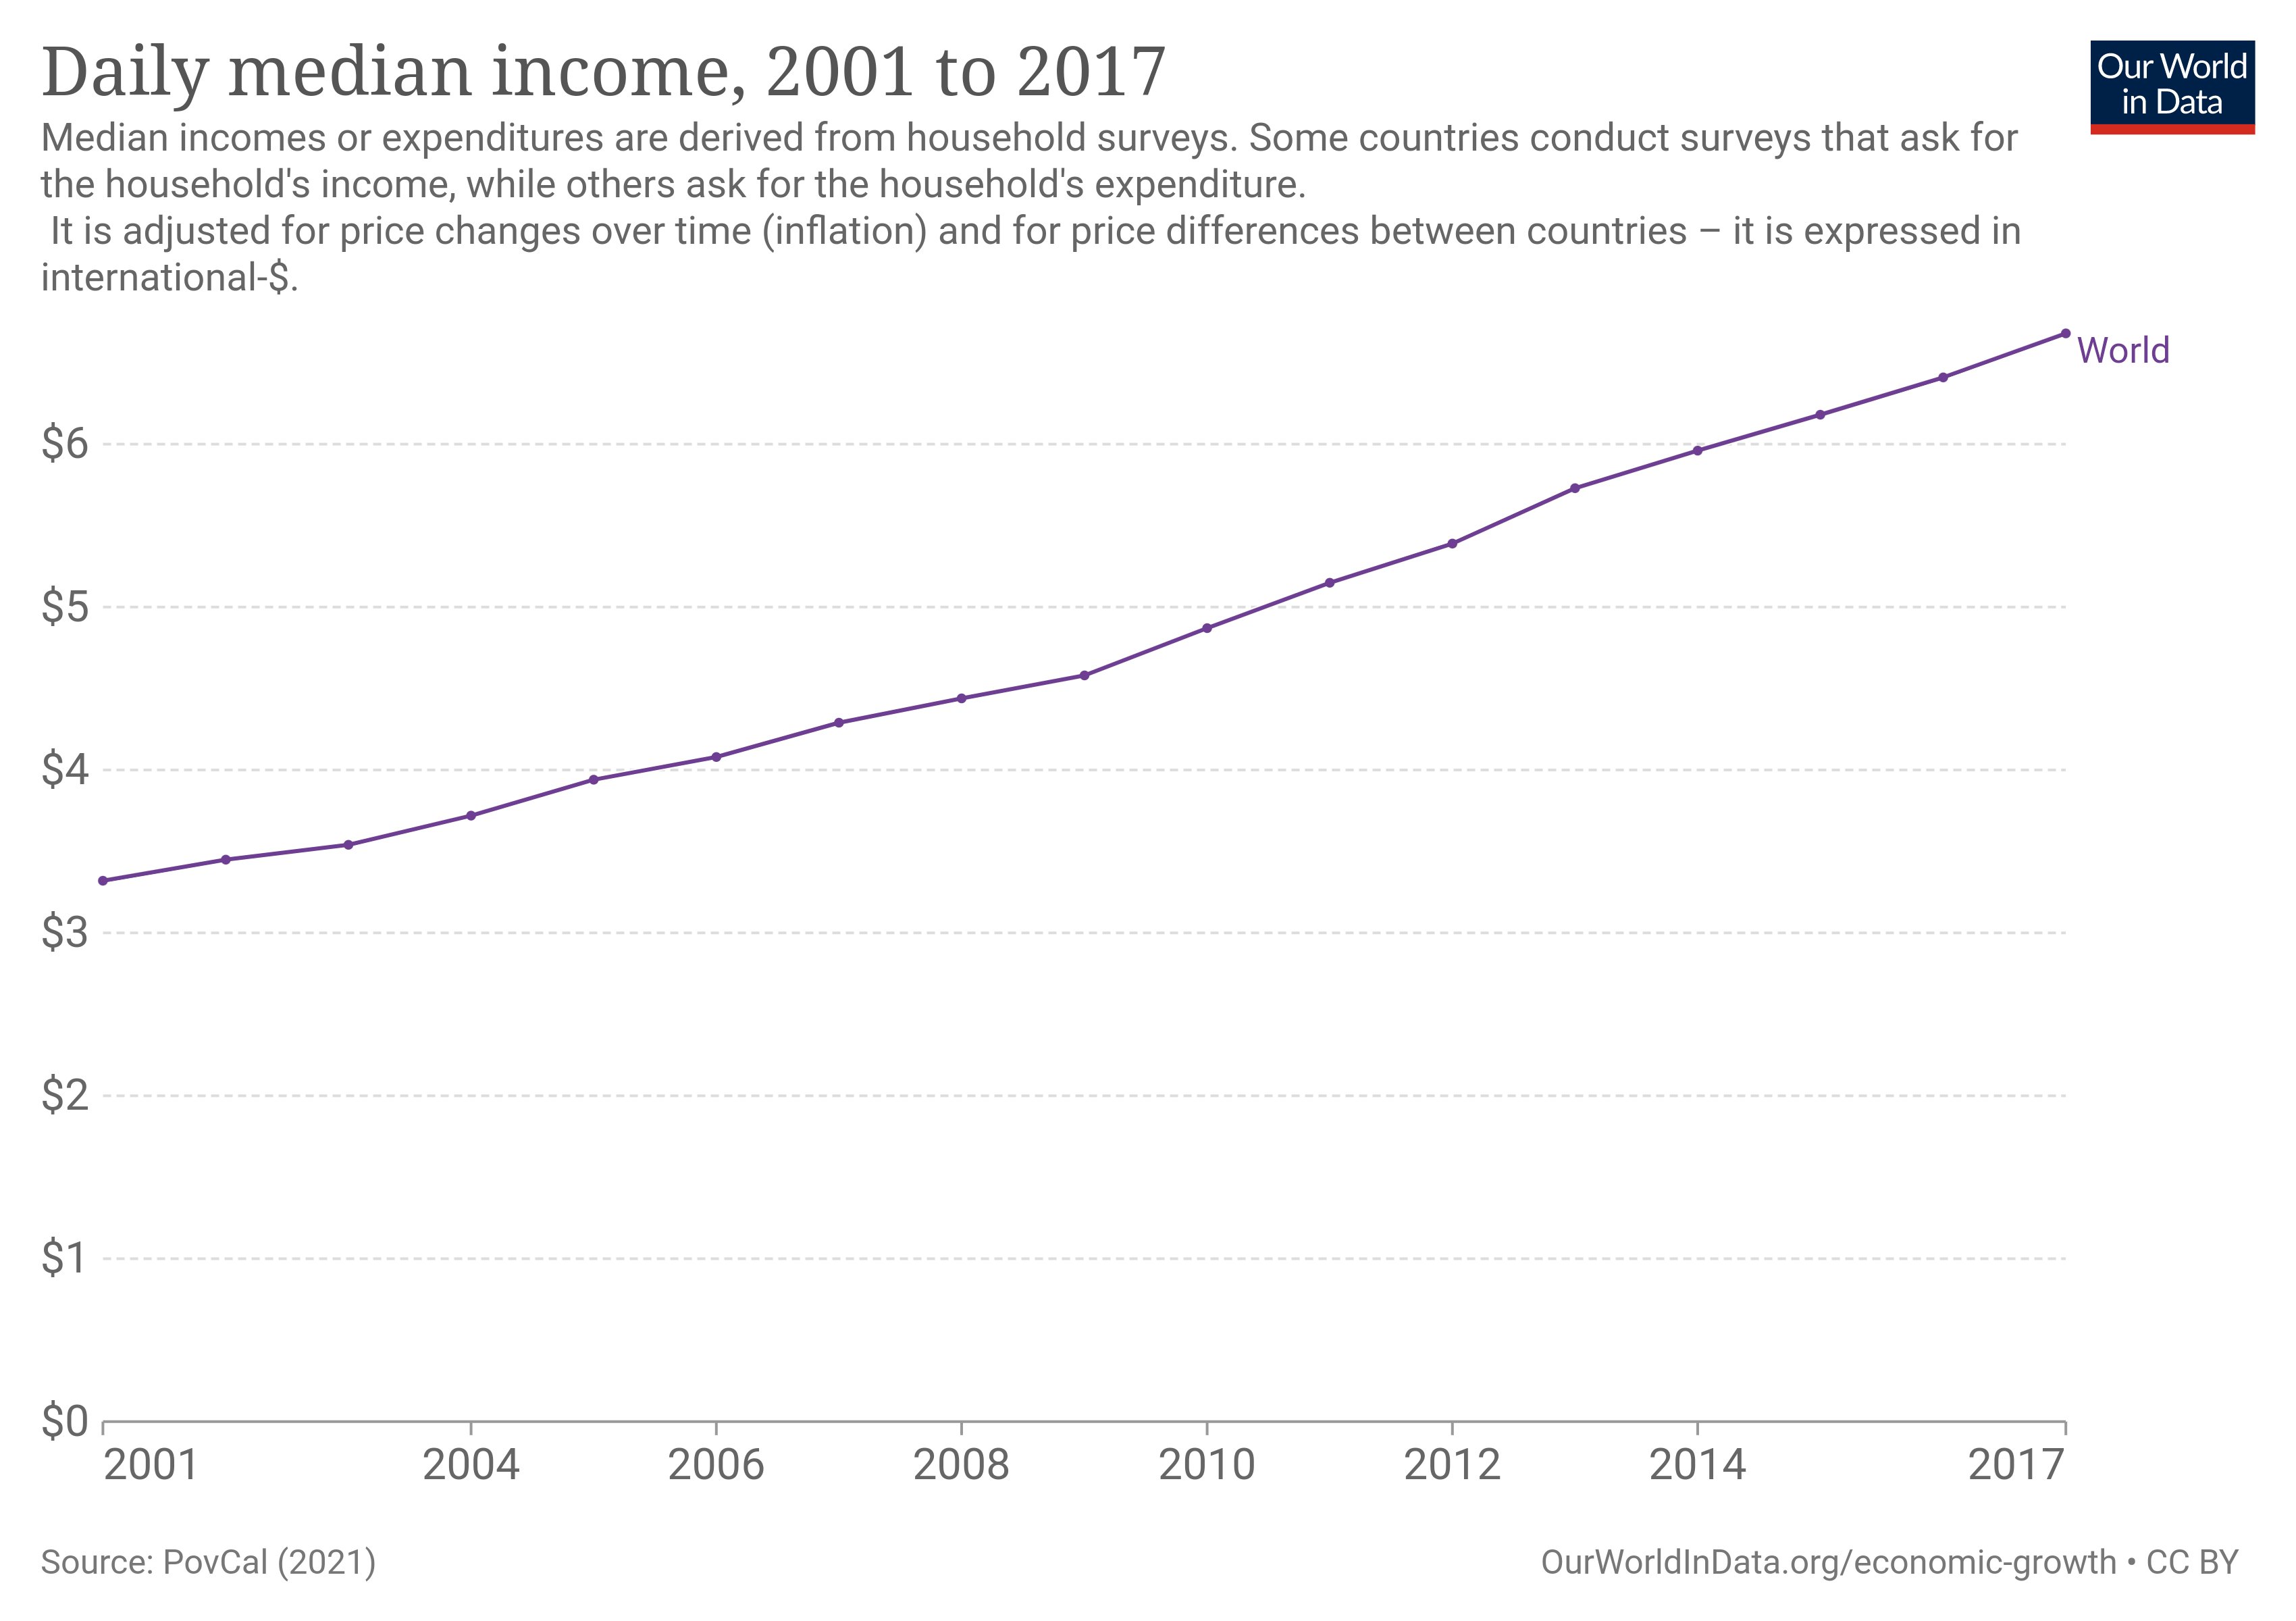 Chart shows that from 2001 to 2017, the daily median income doubled for everyone in the world. 